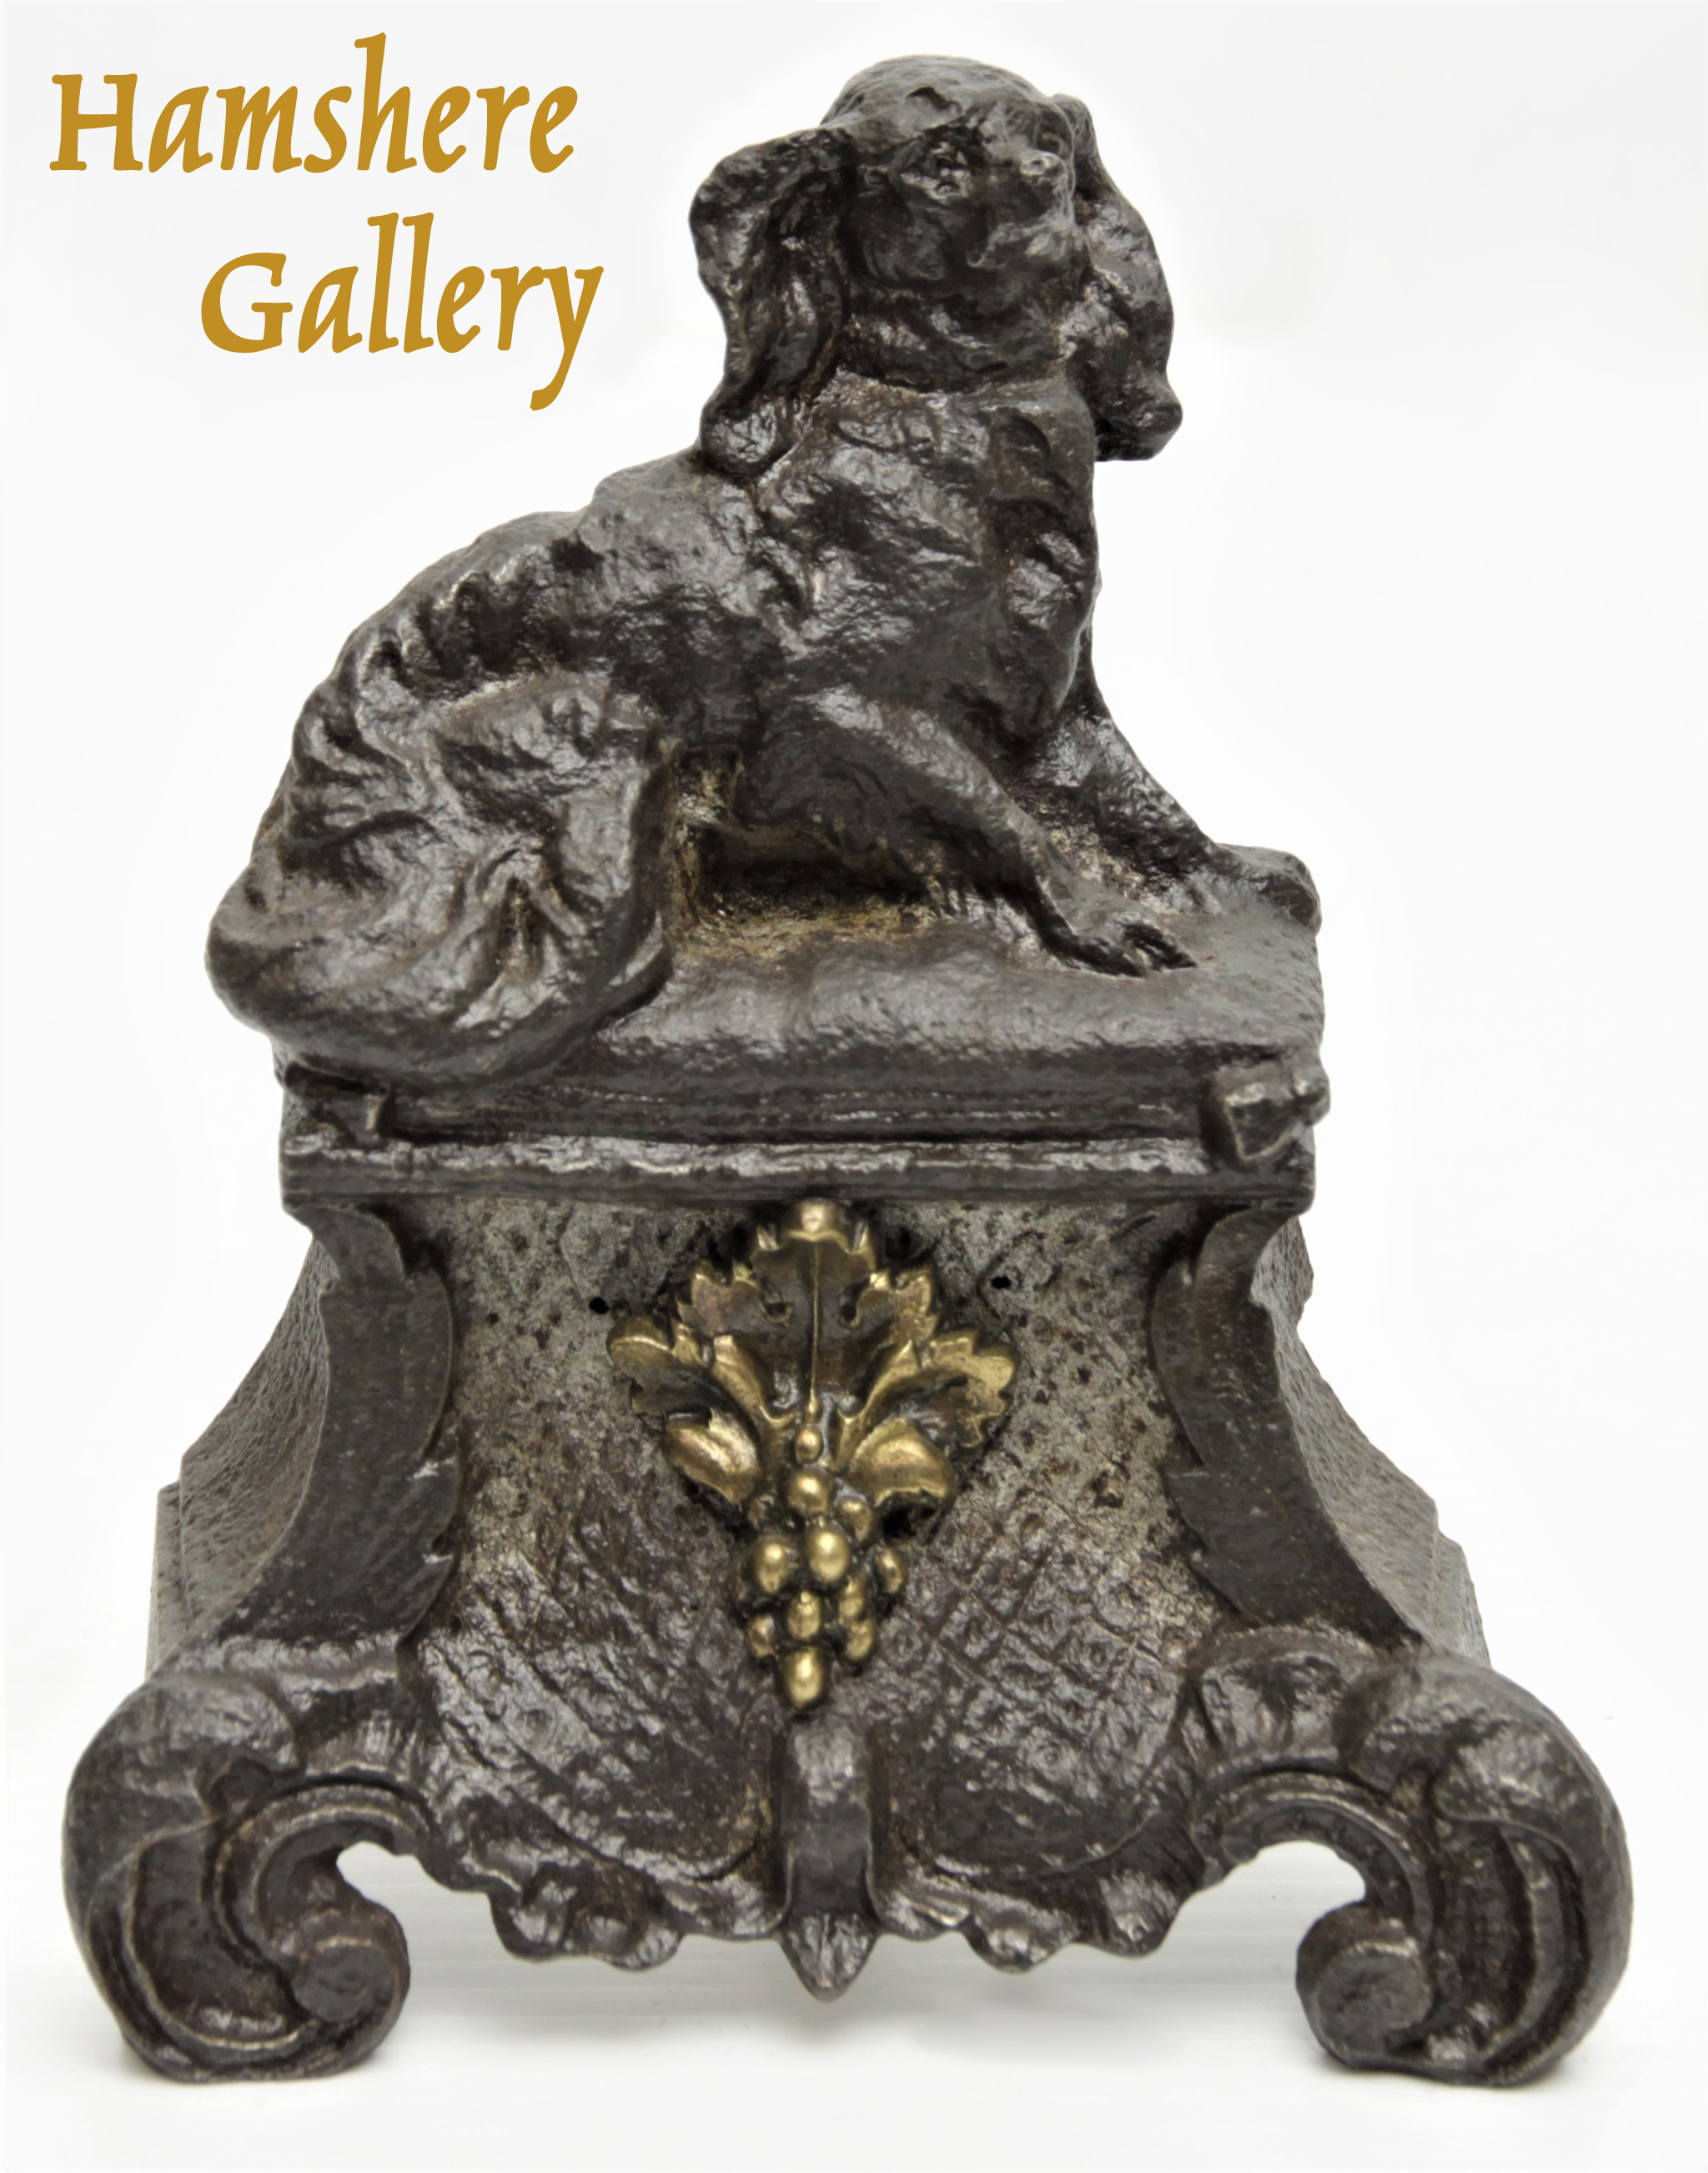 Click for larger image: A very rare pair of 19th century, French, bronze King Charles Cavalier Spaniel chenets / fire dogs / andirons - A very rare pair of 19th century, French, bronze King Charles Cavalier Spaniel chenets / fire dogs / andirons